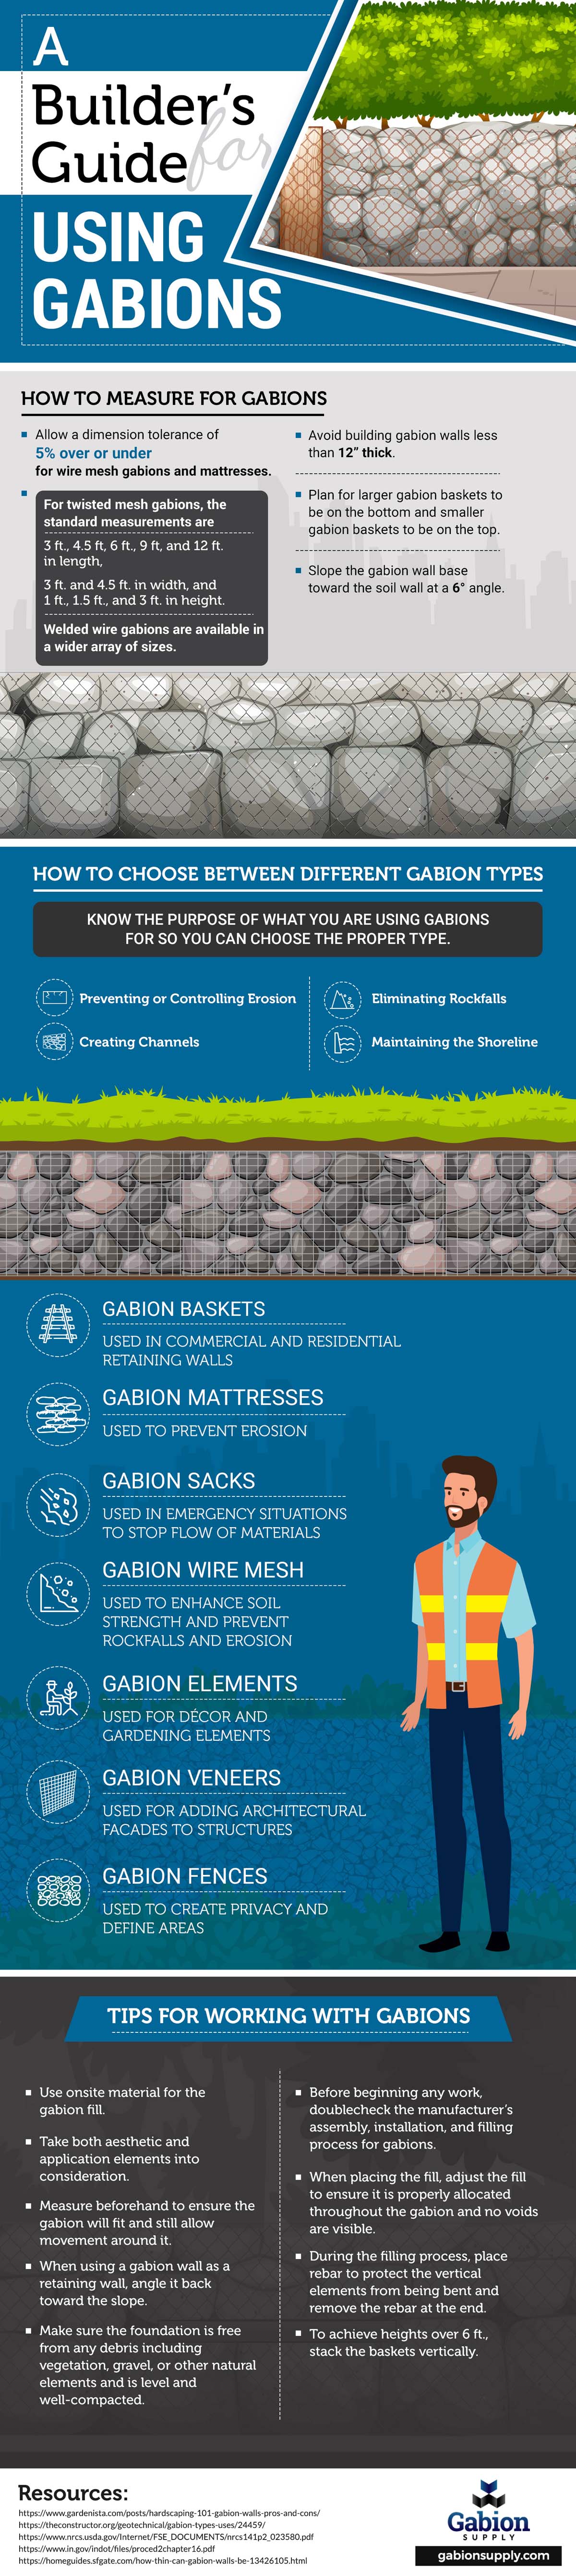 A Builder's Guide for Using Gabions